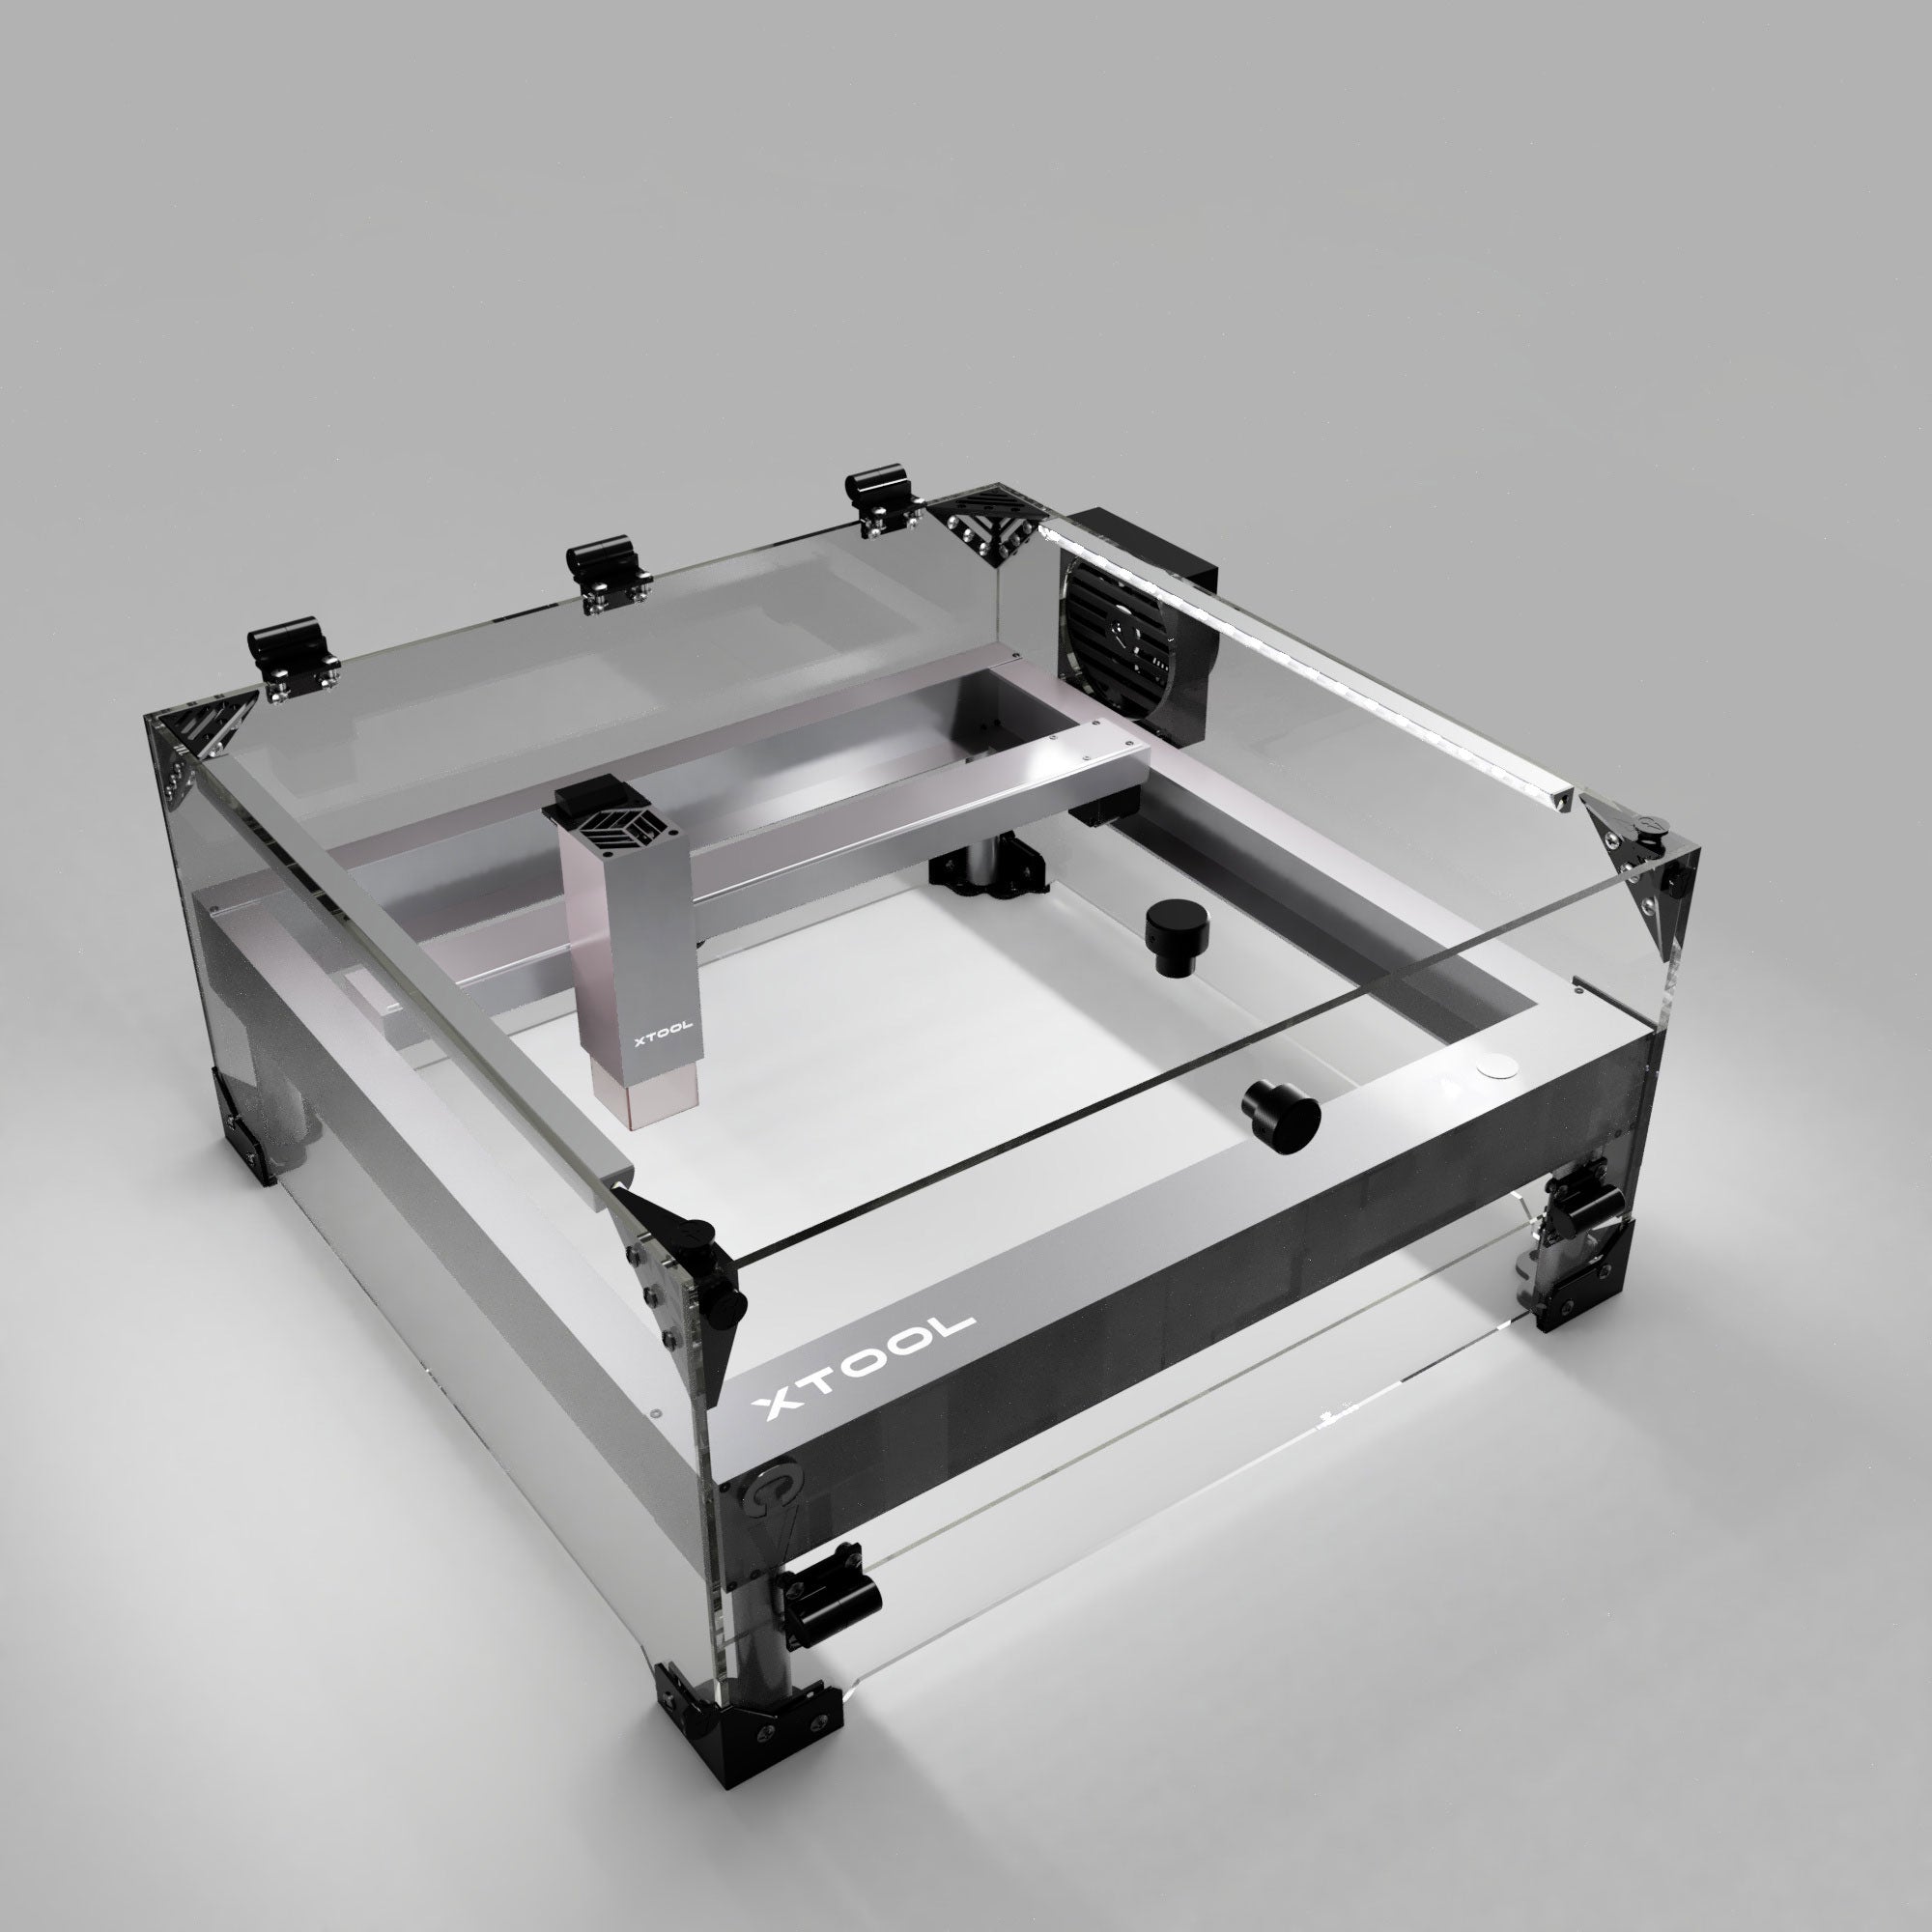 xTool Enclosure: Foldable and Smoke-proof Cover for D1/D1 Pro and Other Laser Engravers